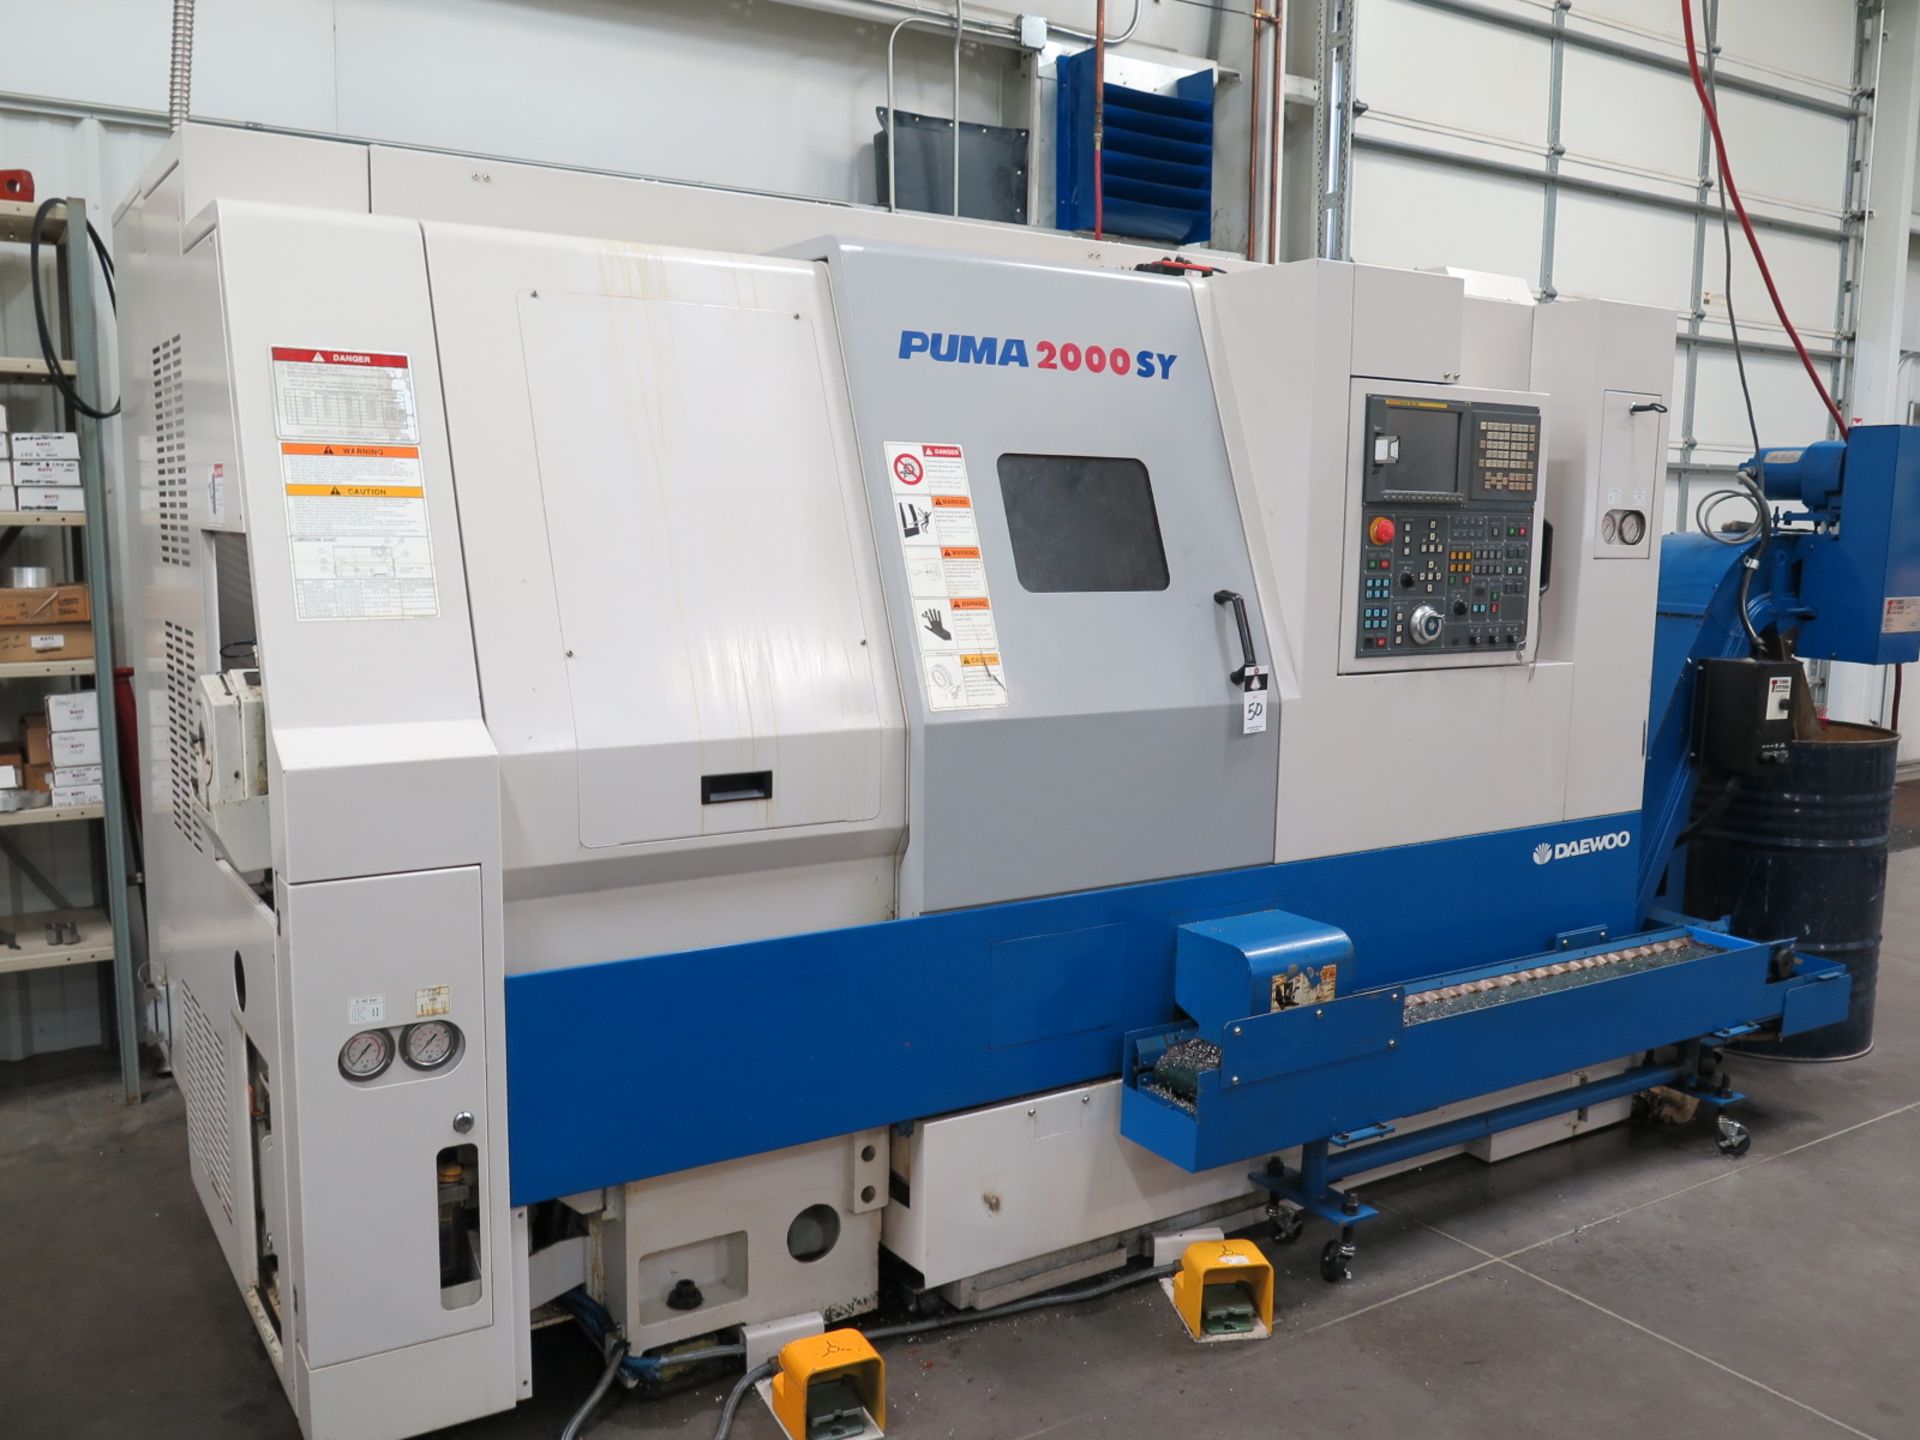 2003 Daewoo PUMA 2000SY Twin Spindle Live Turret CNC Turning Center s/n P200SY0202 w/ Fanuc Series - Image 2 of 12